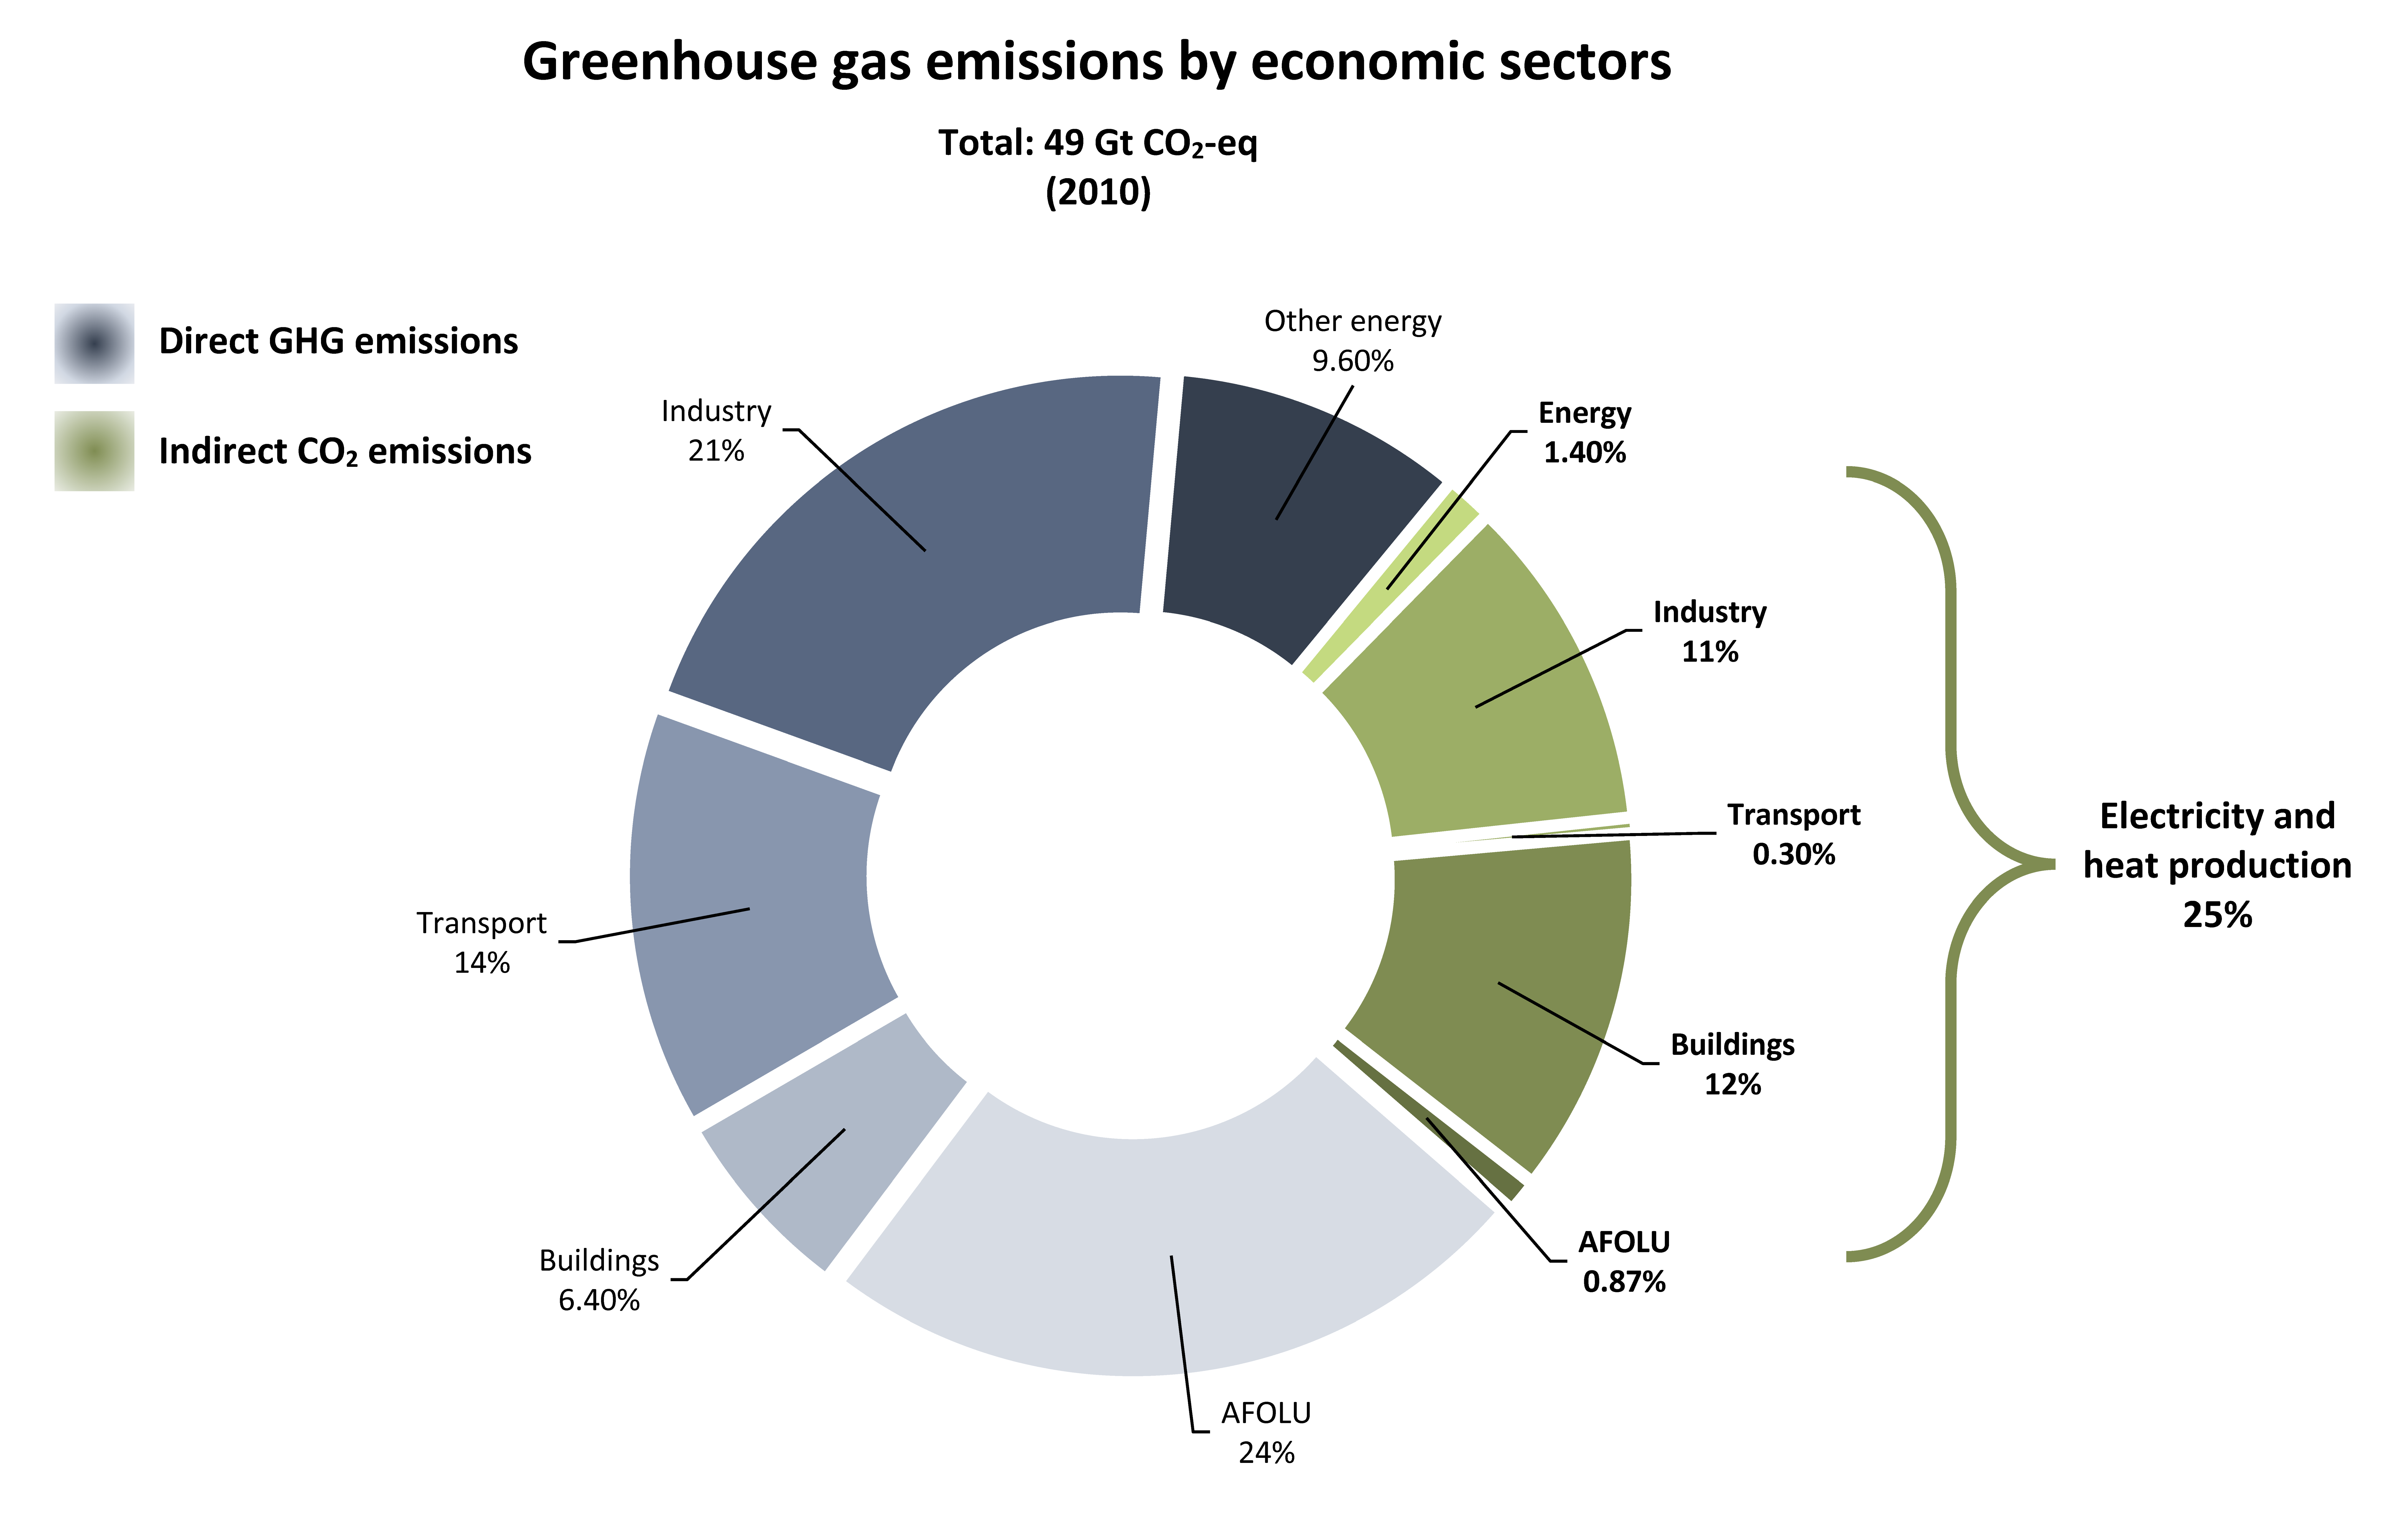 Pie chart shows greenhouse gas emissions by economic sectors. Total: 49 Gt CO2-eq in 2010. 25% indirect CO2 emissions: energy (1.4%), industry (11%), transport (0.3%), buildings (12%), AFOLU (0.87%). These make up electricity and heat production. 75% indirect CO2 emissions: industry (21%), transport (14%), buildings (6.4%), AFOLU (24%).